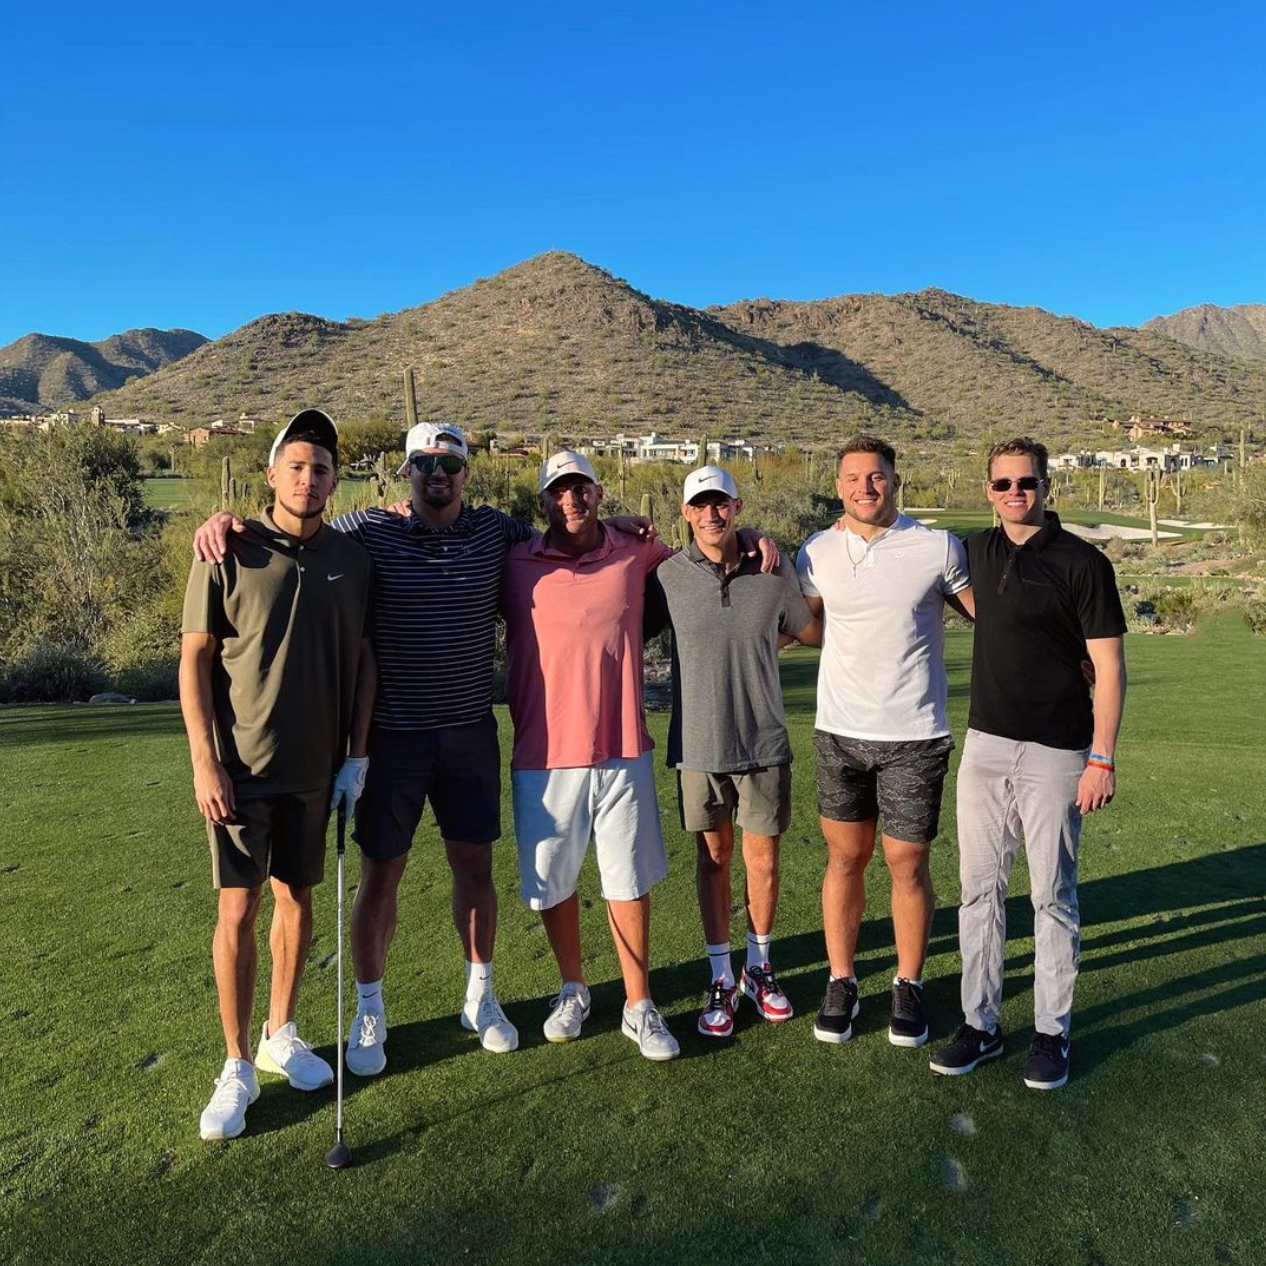 Joe Burrow easing back into post-Super Bowl life with all-star golf crew  including Devin Booker, Nick Bosa, and Sam Hubbard, This is the Loop